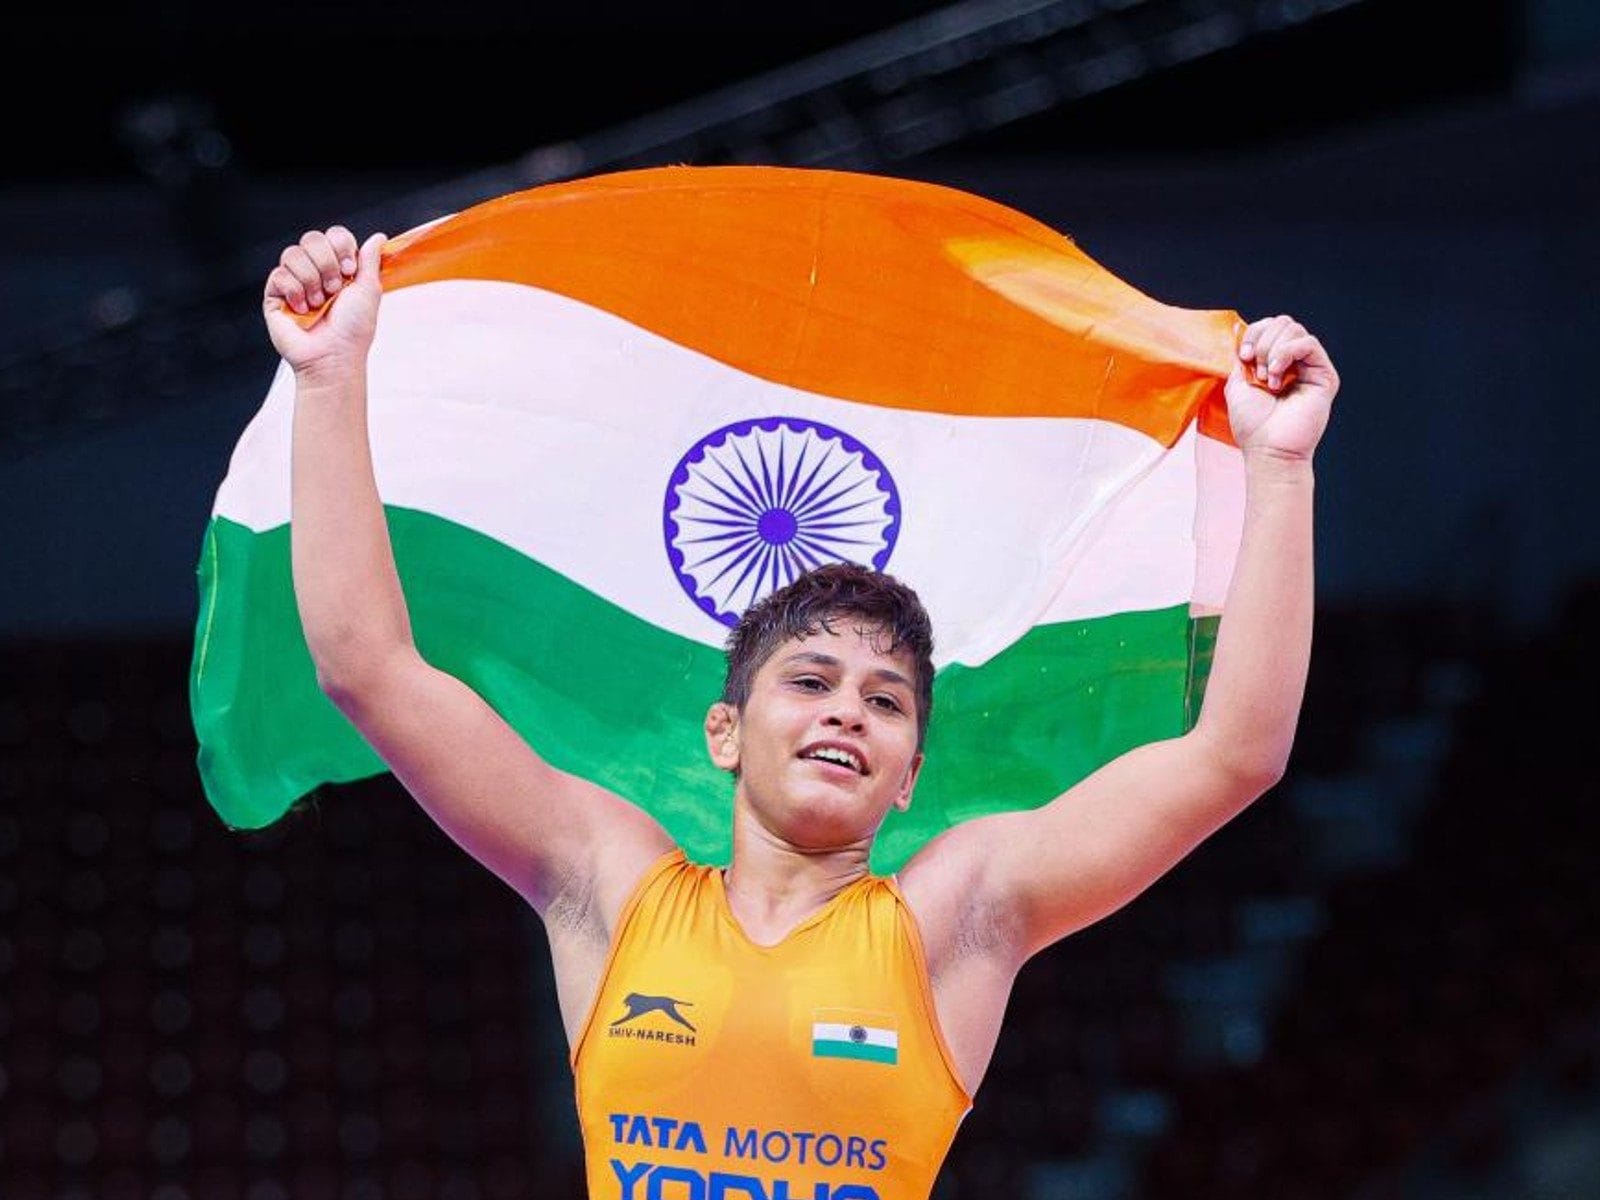 17-Year-Old Antim Becomes First Indian Girl to Win World Junior Wrestling Gold pic